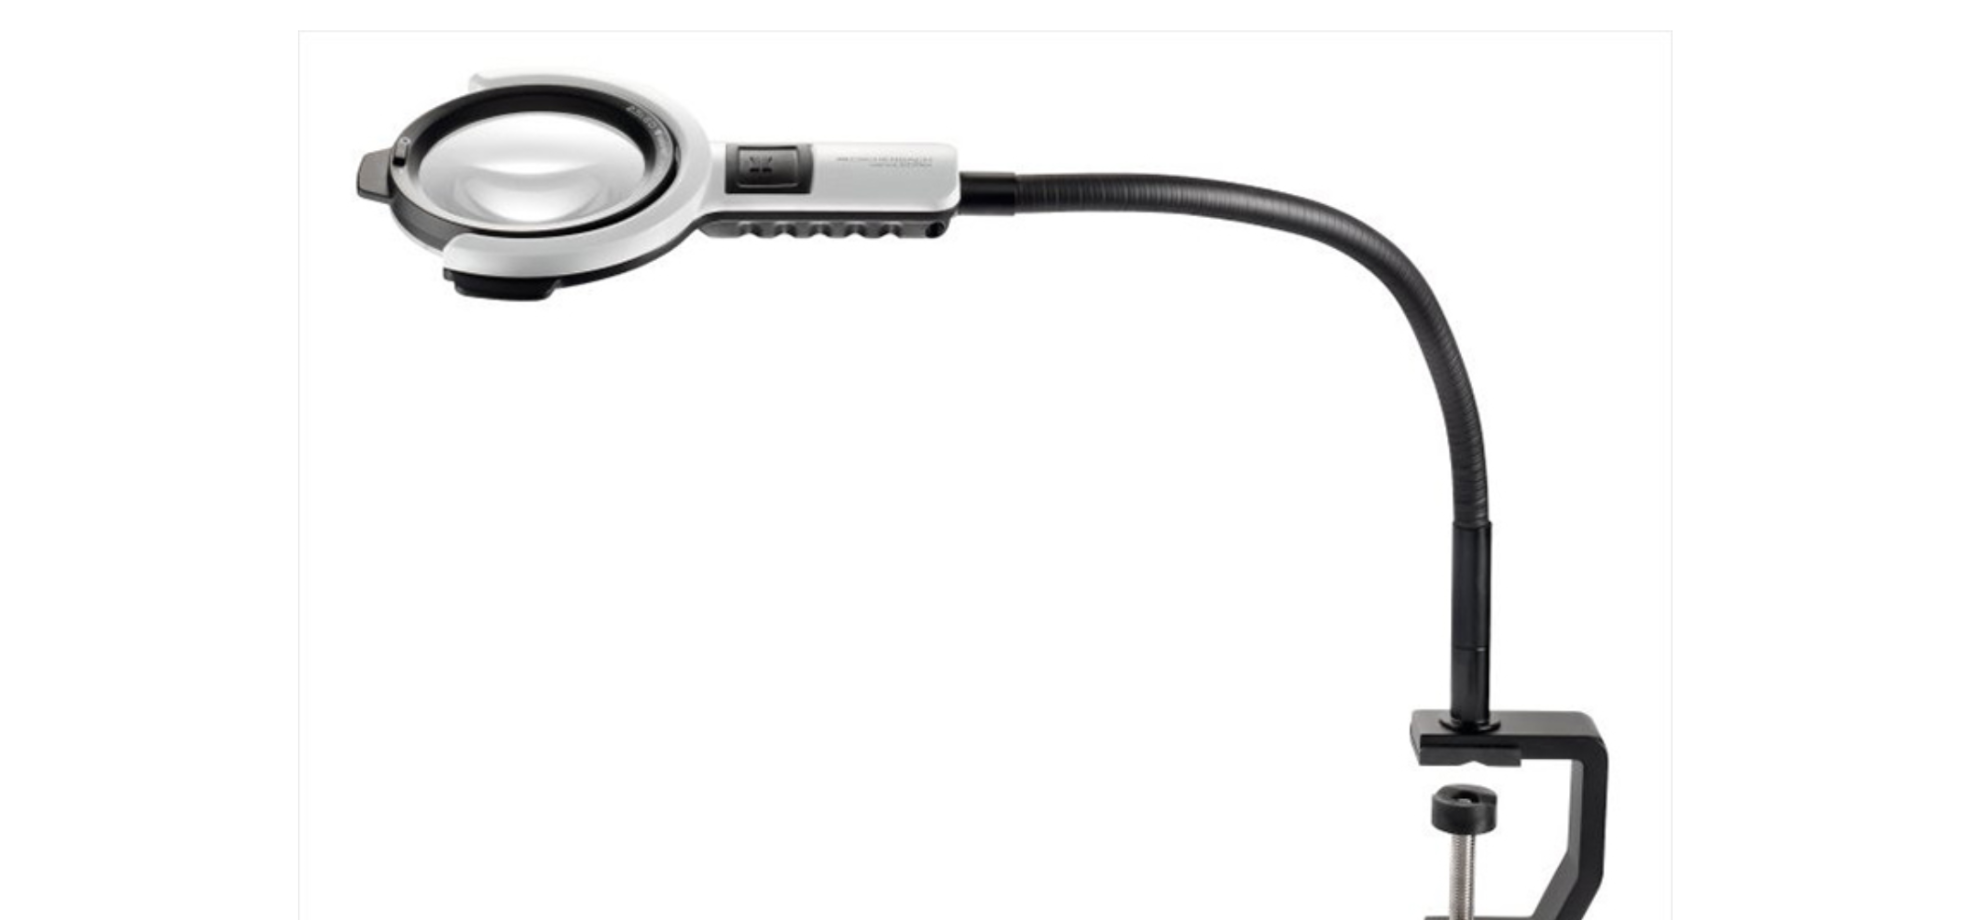 Image of a flex-arm desktop lamp magnifier in Low Vision Supplies lighting collection